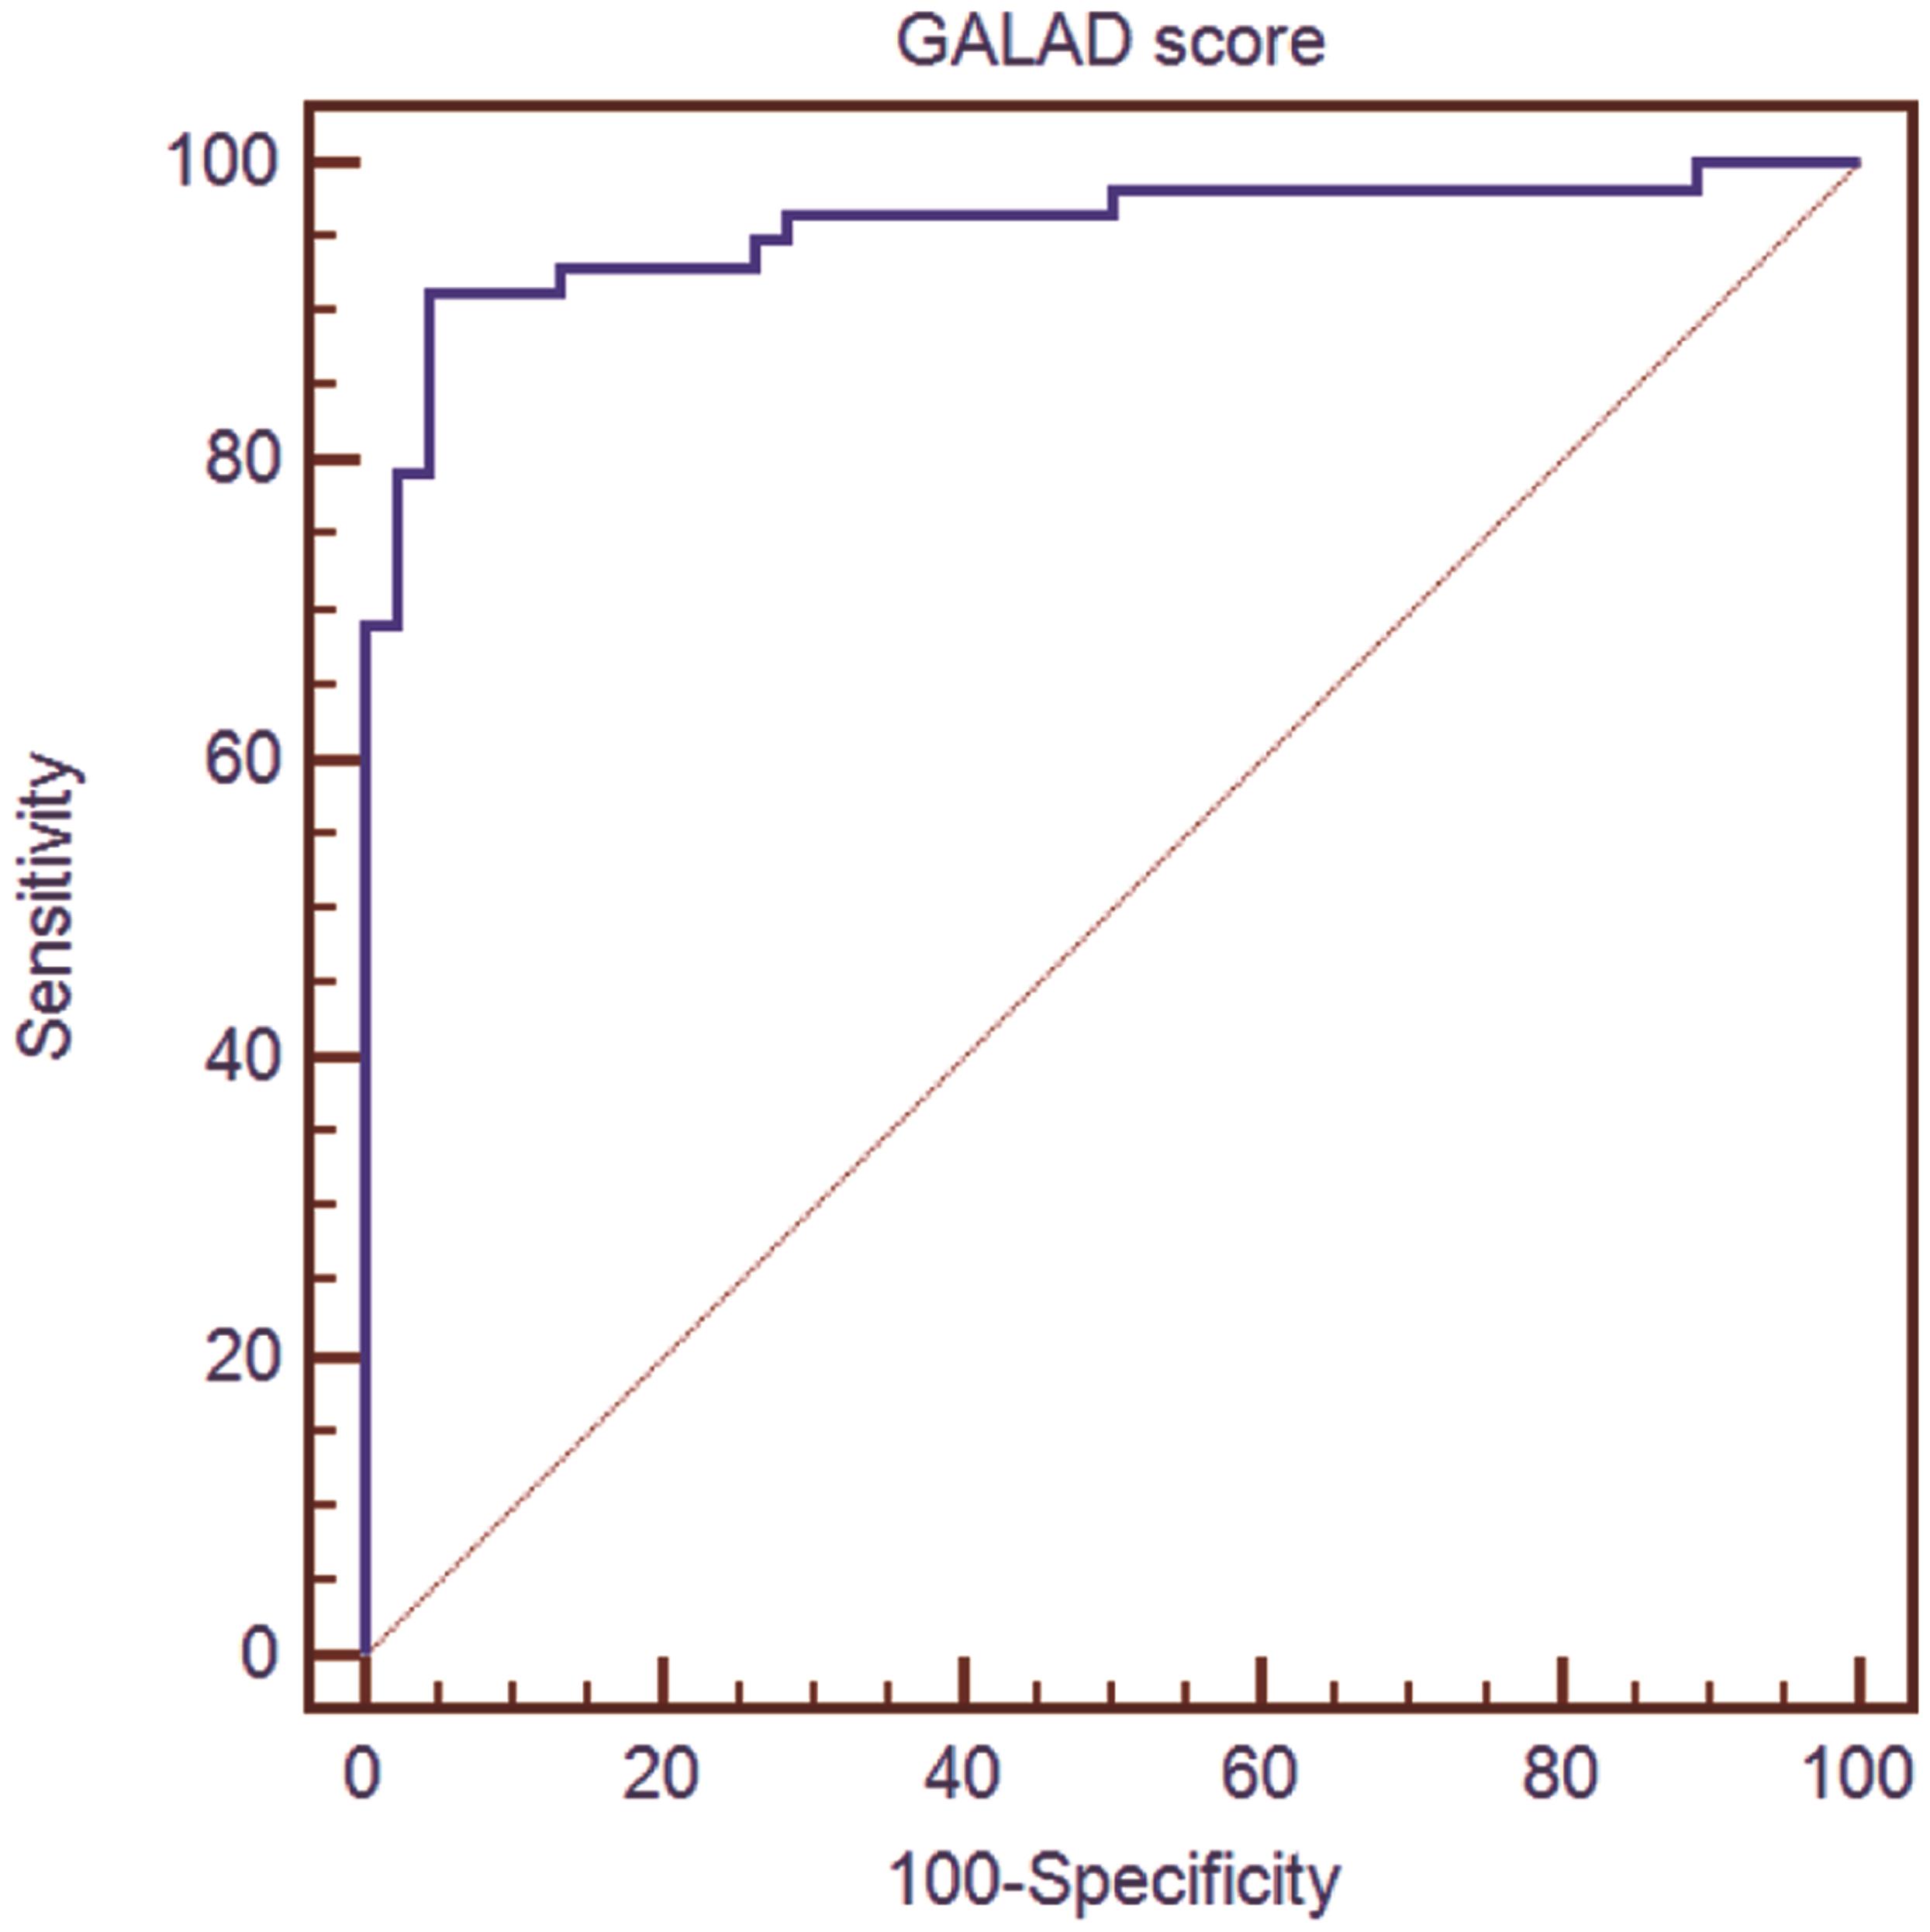 Receiver operating characteristic curve of GALAD score as a predictor of hepatocellular carcinoma.